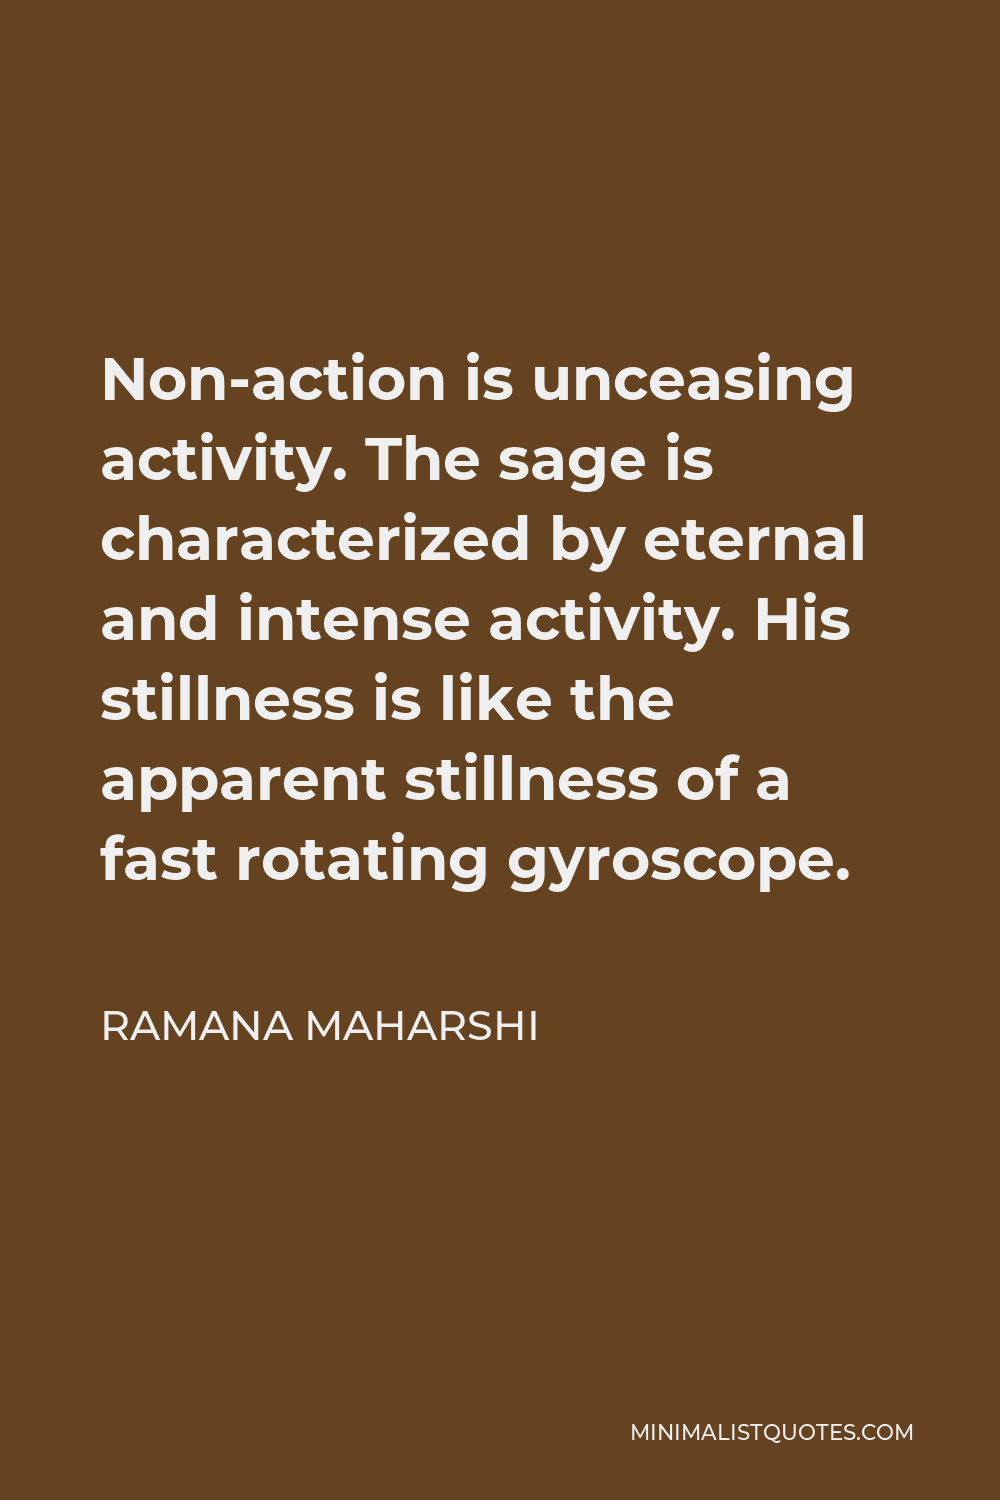 Ramana Maharshi Quote - Non-action is unceasing activity. The sage is characterized by eternal and intense activity. His stillness is like the apparent stillness of a fast rotating gyroscope.